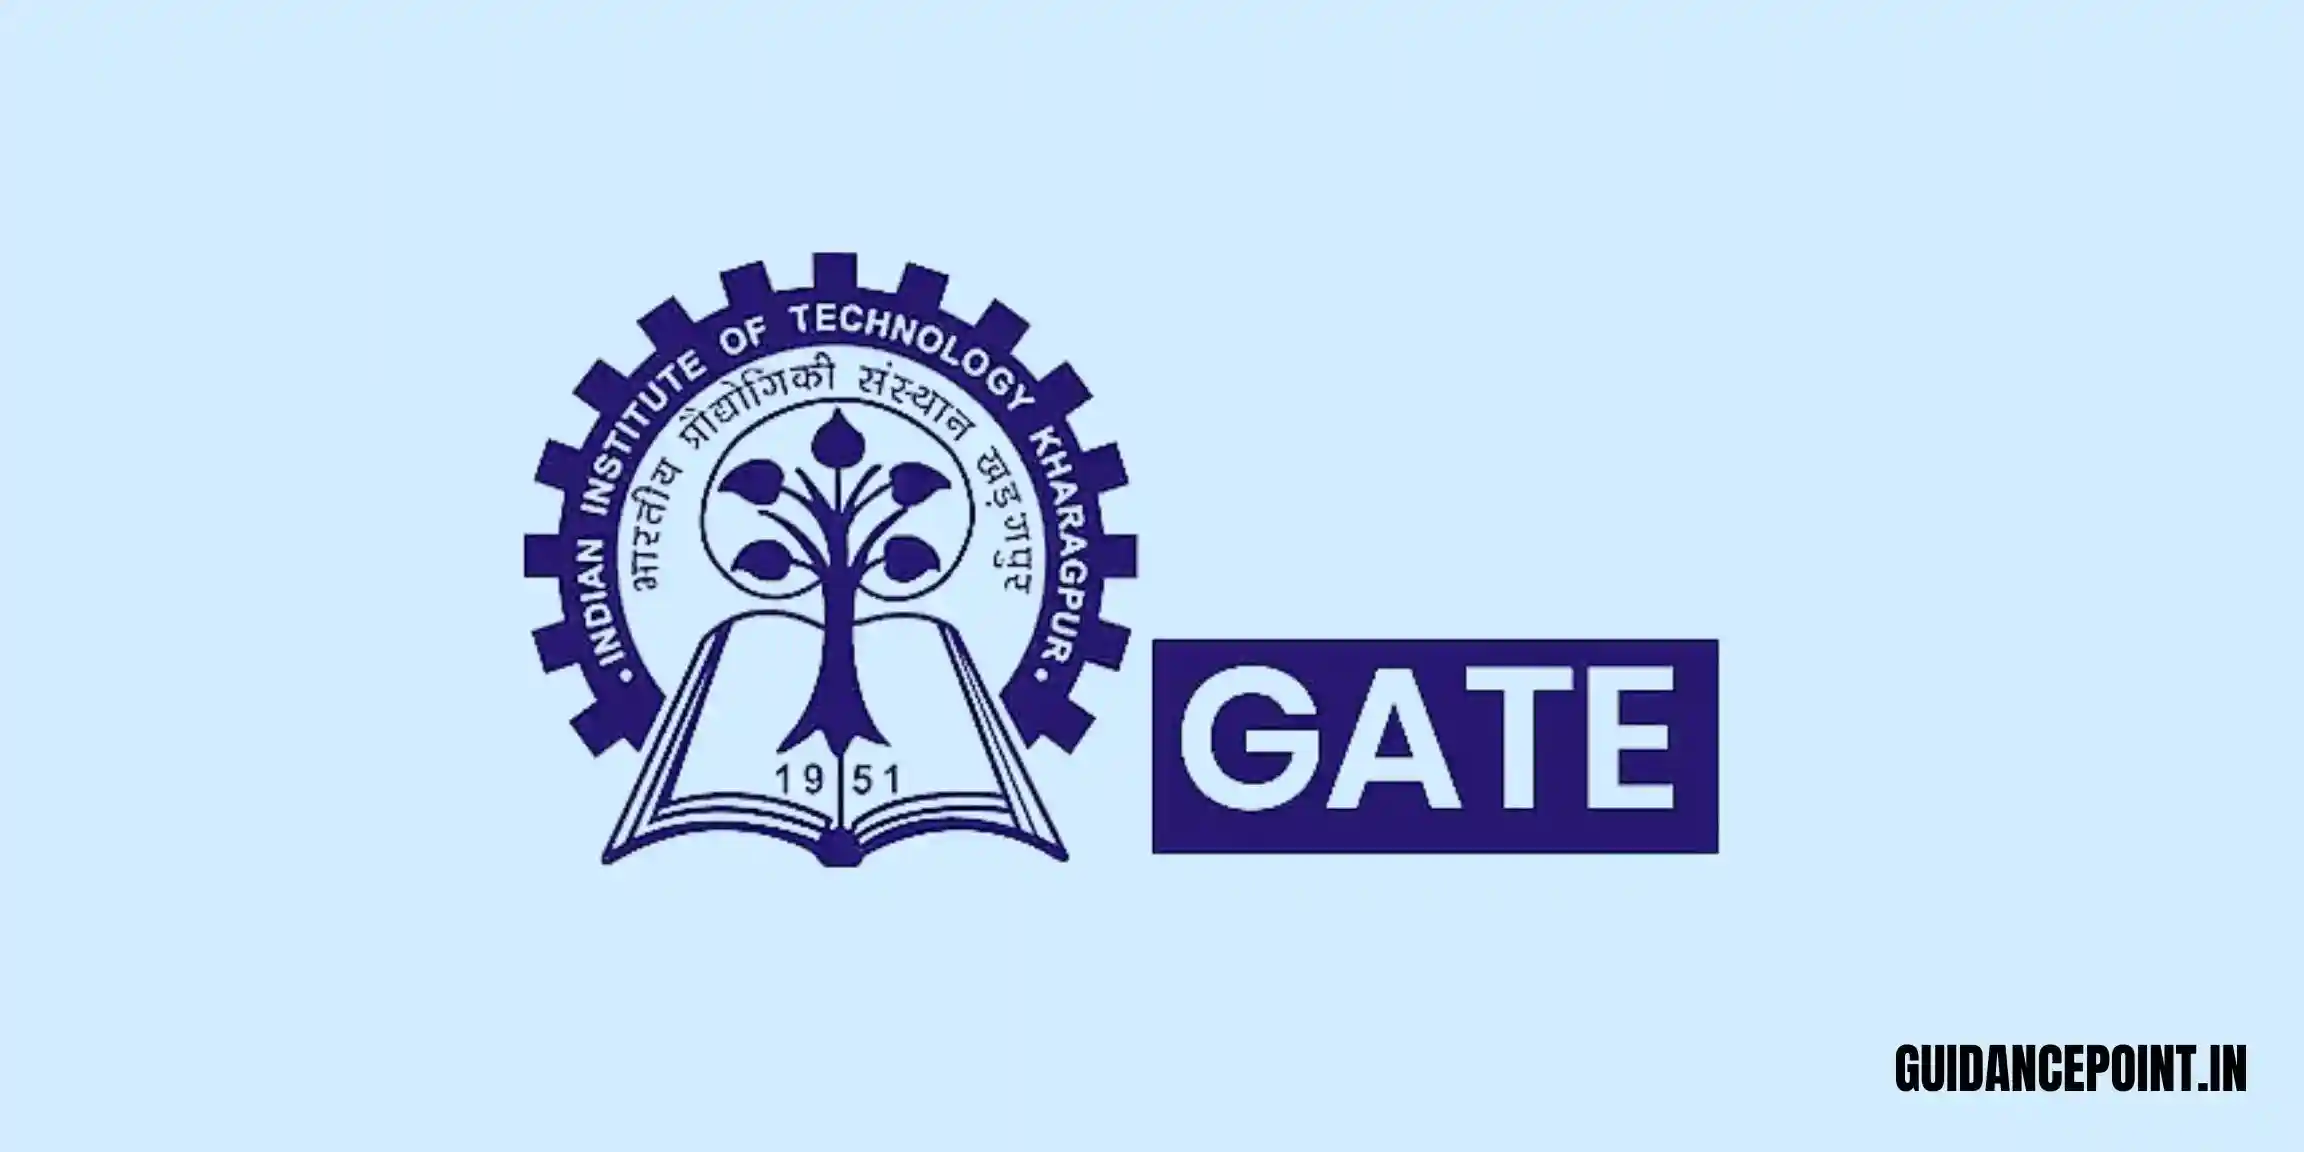 GATE training Course in pune